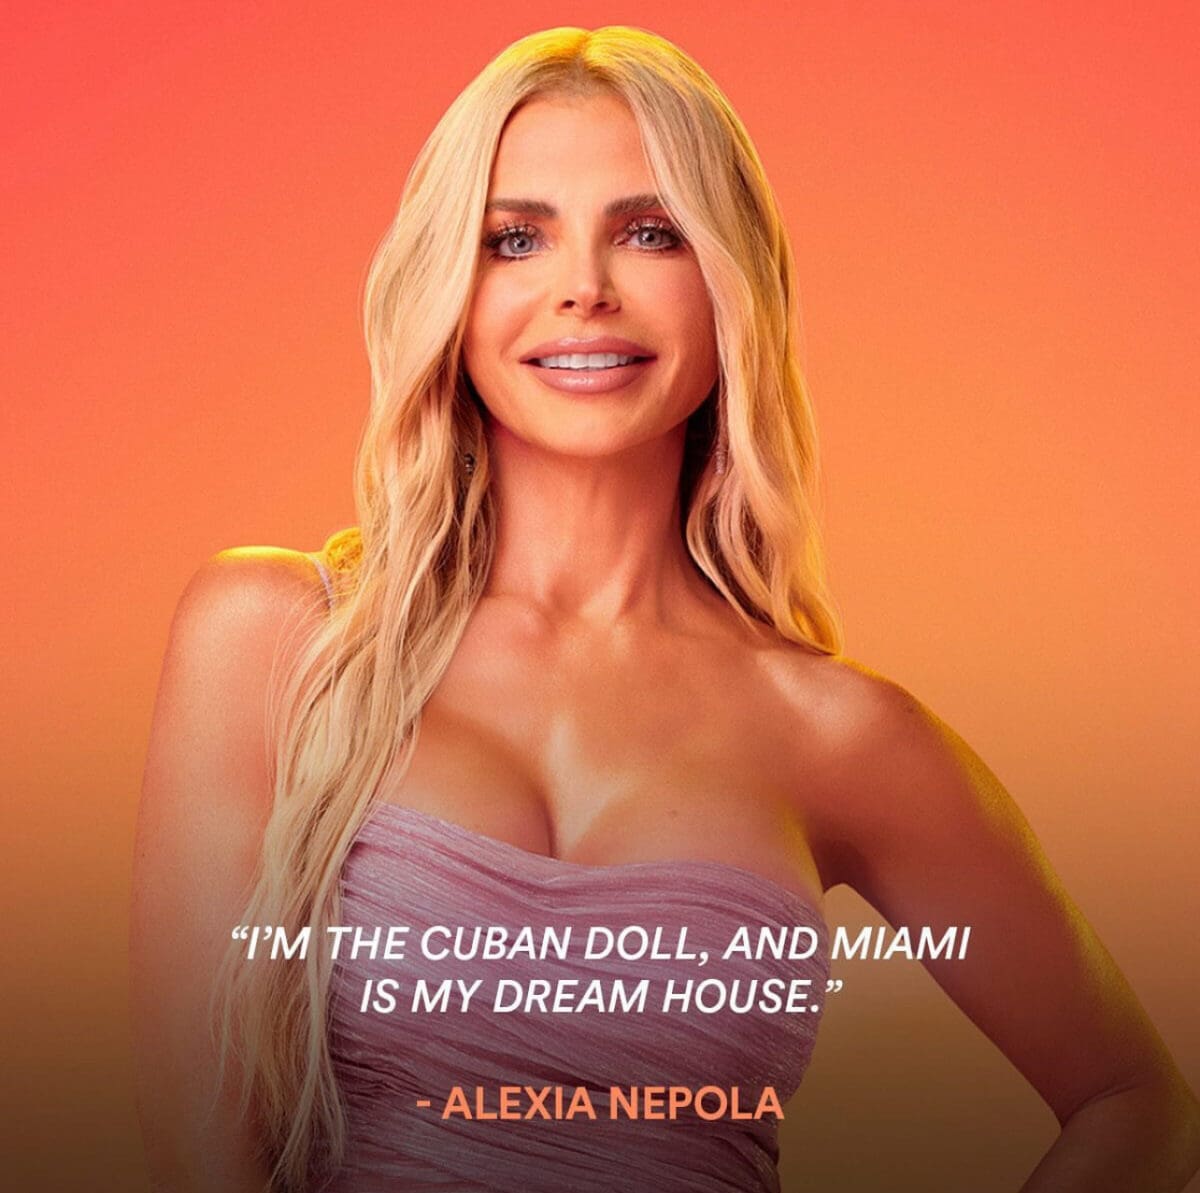 Alexia is a Barbie girl living in a Miami world.